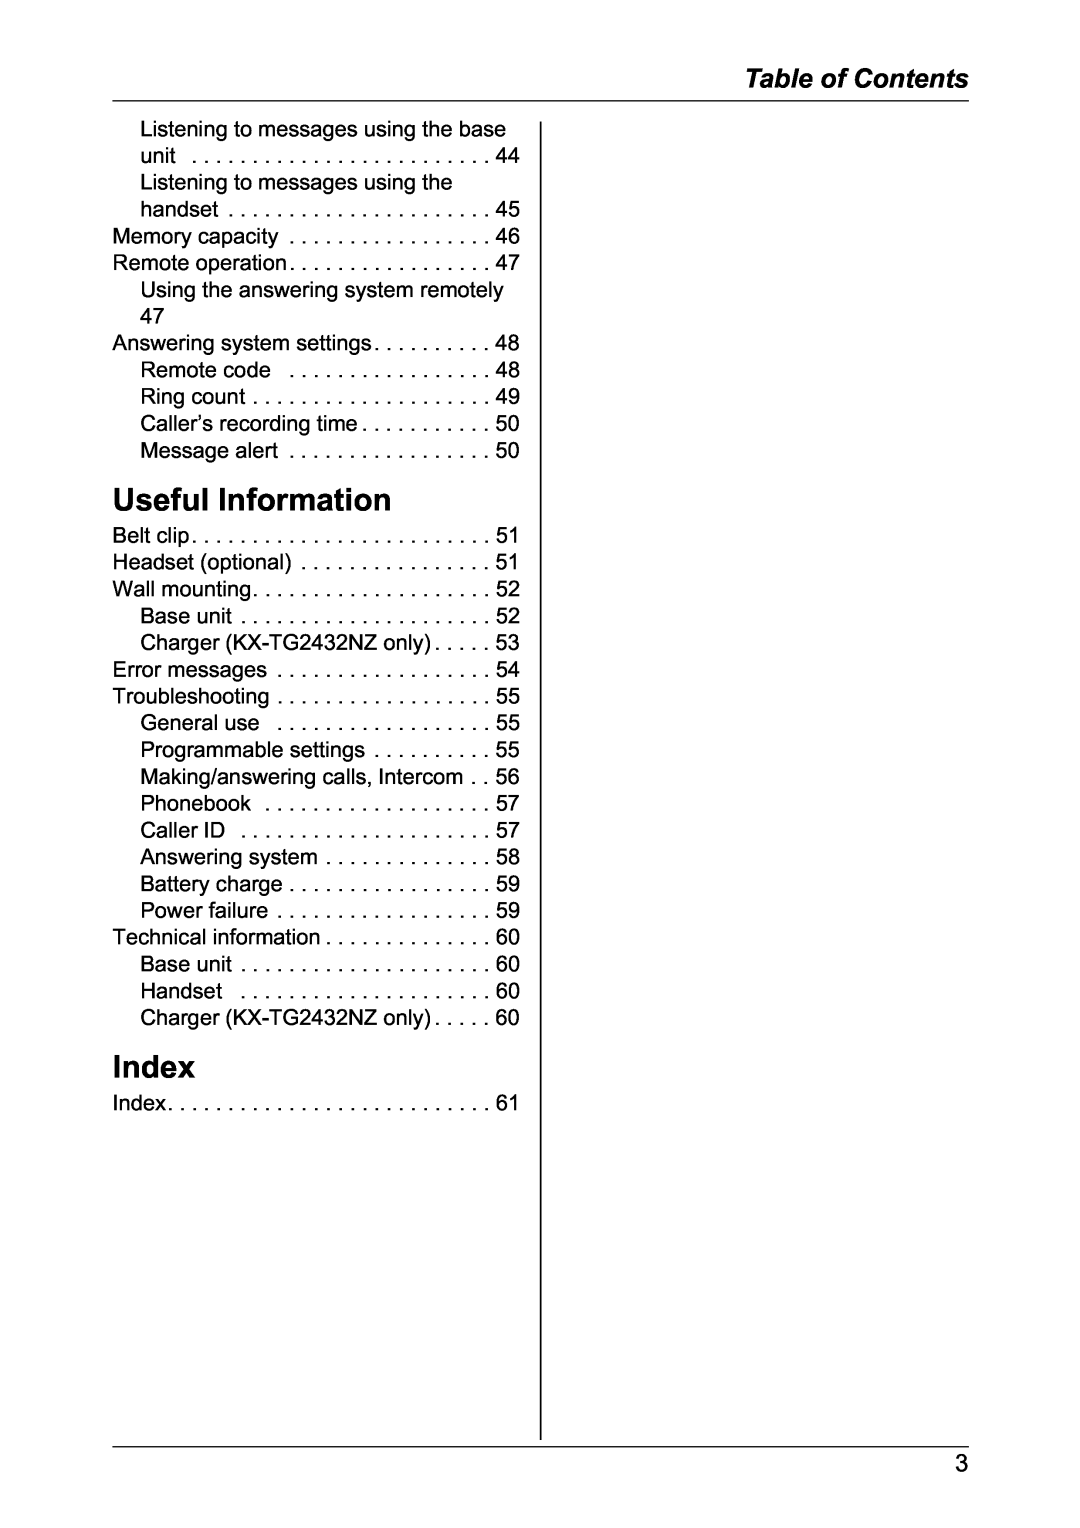 Panasonic KX-TG2432NZ, KX-TG2431NZ operating instructions Useful Information, Index, Table of Contents 